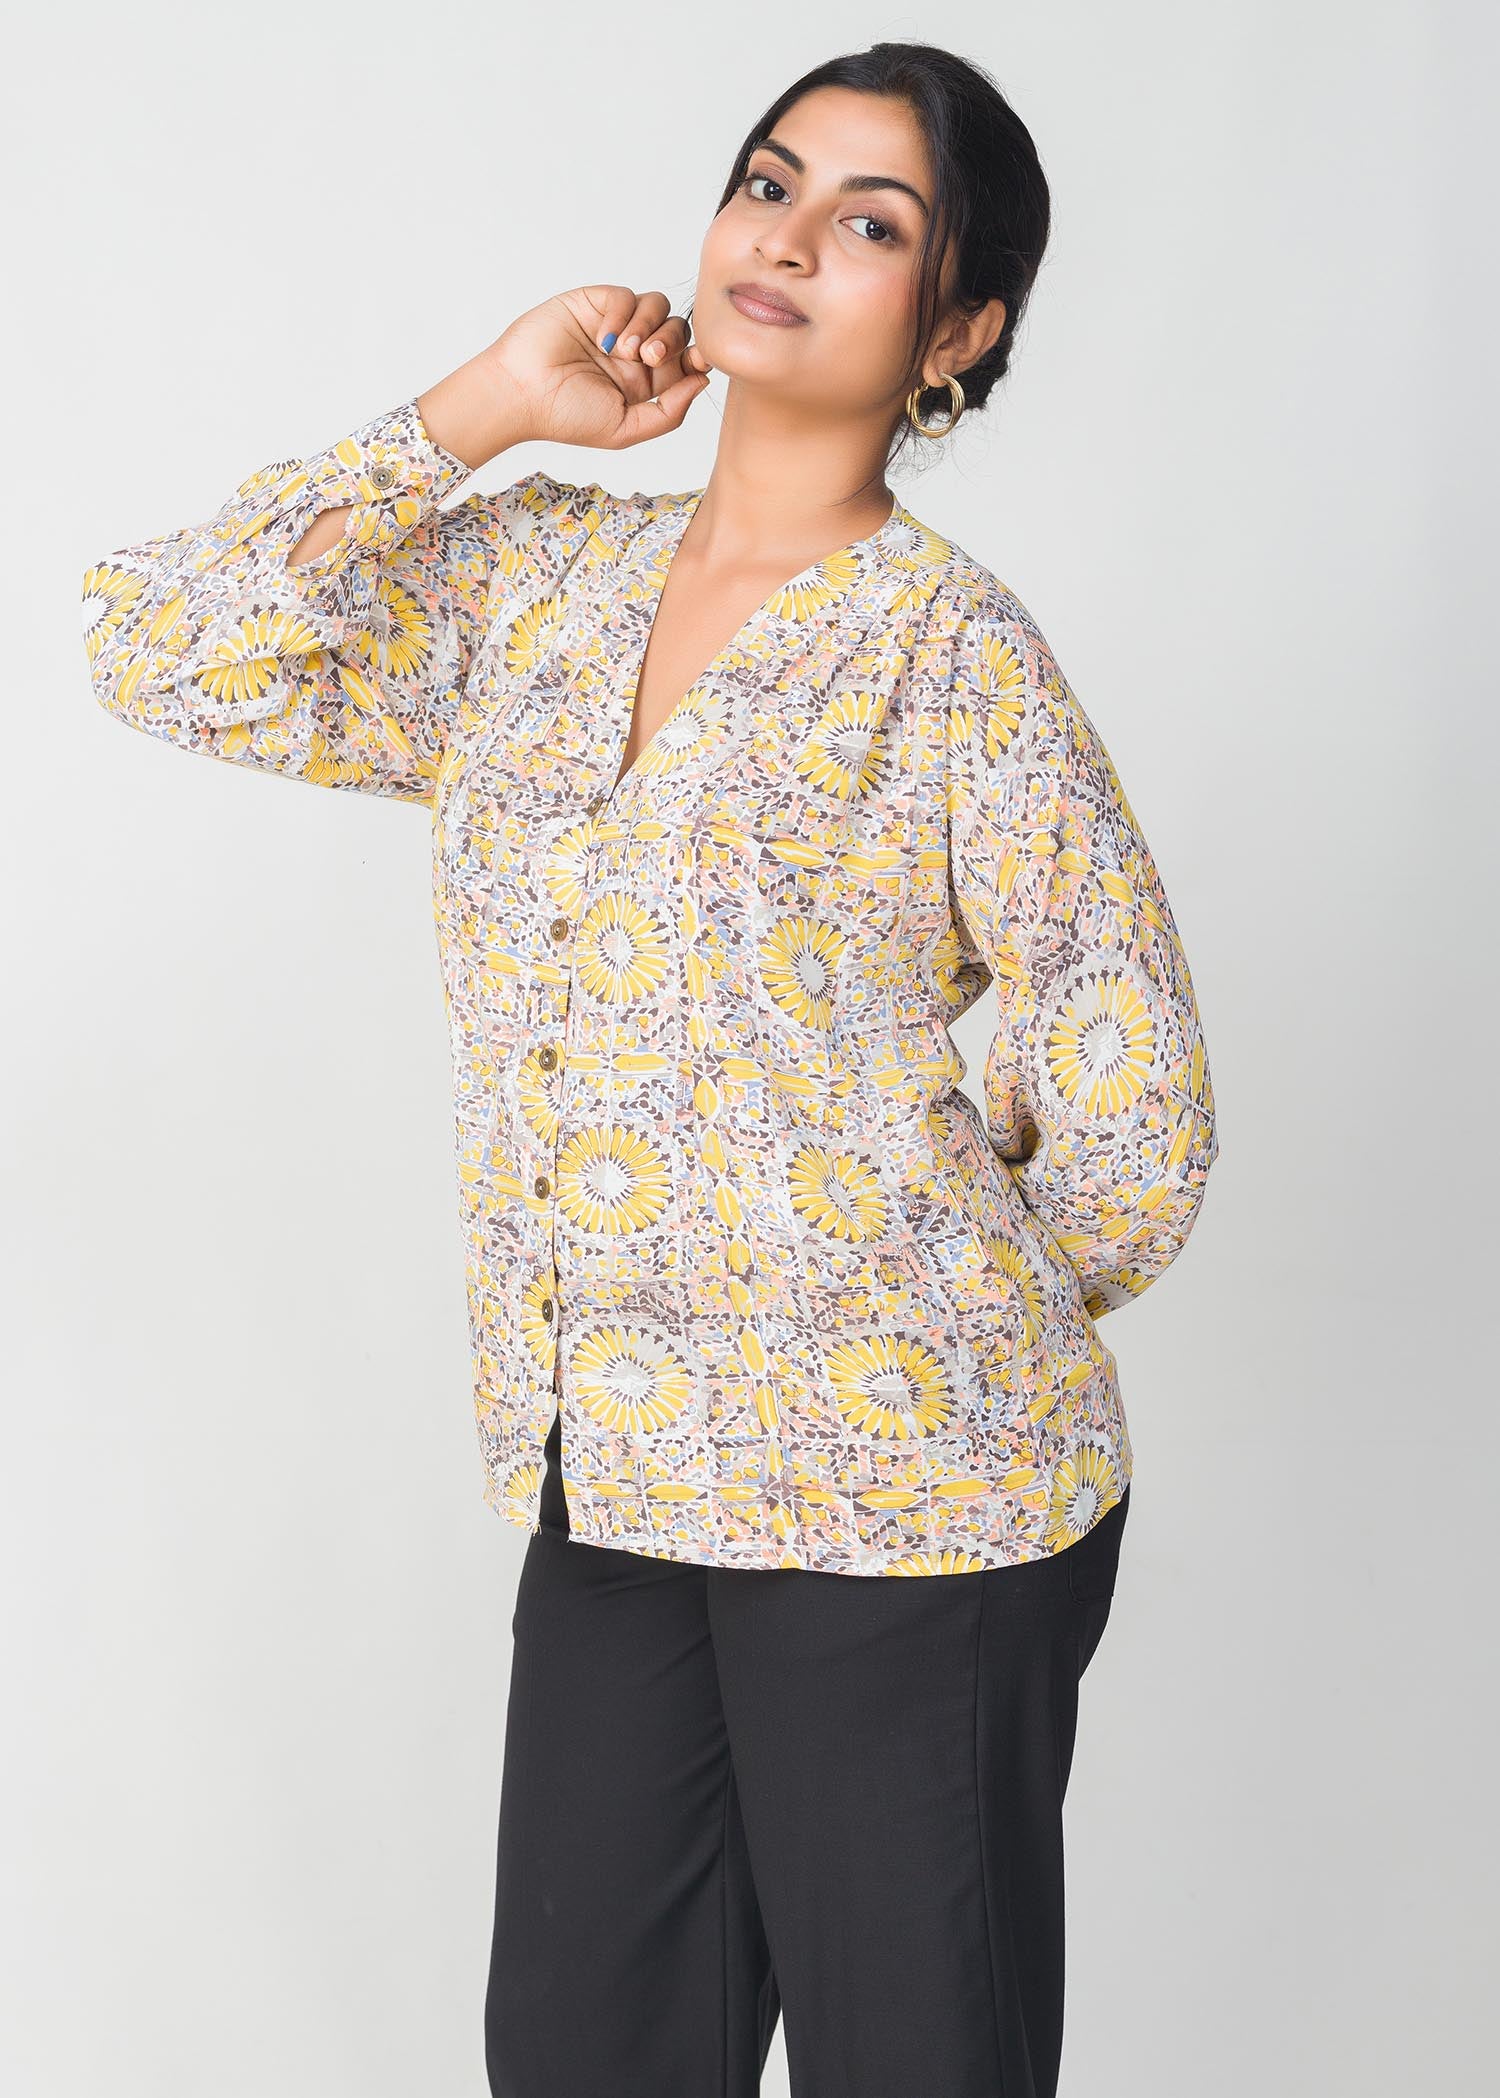 Gathered sleeve cuff detail blouse